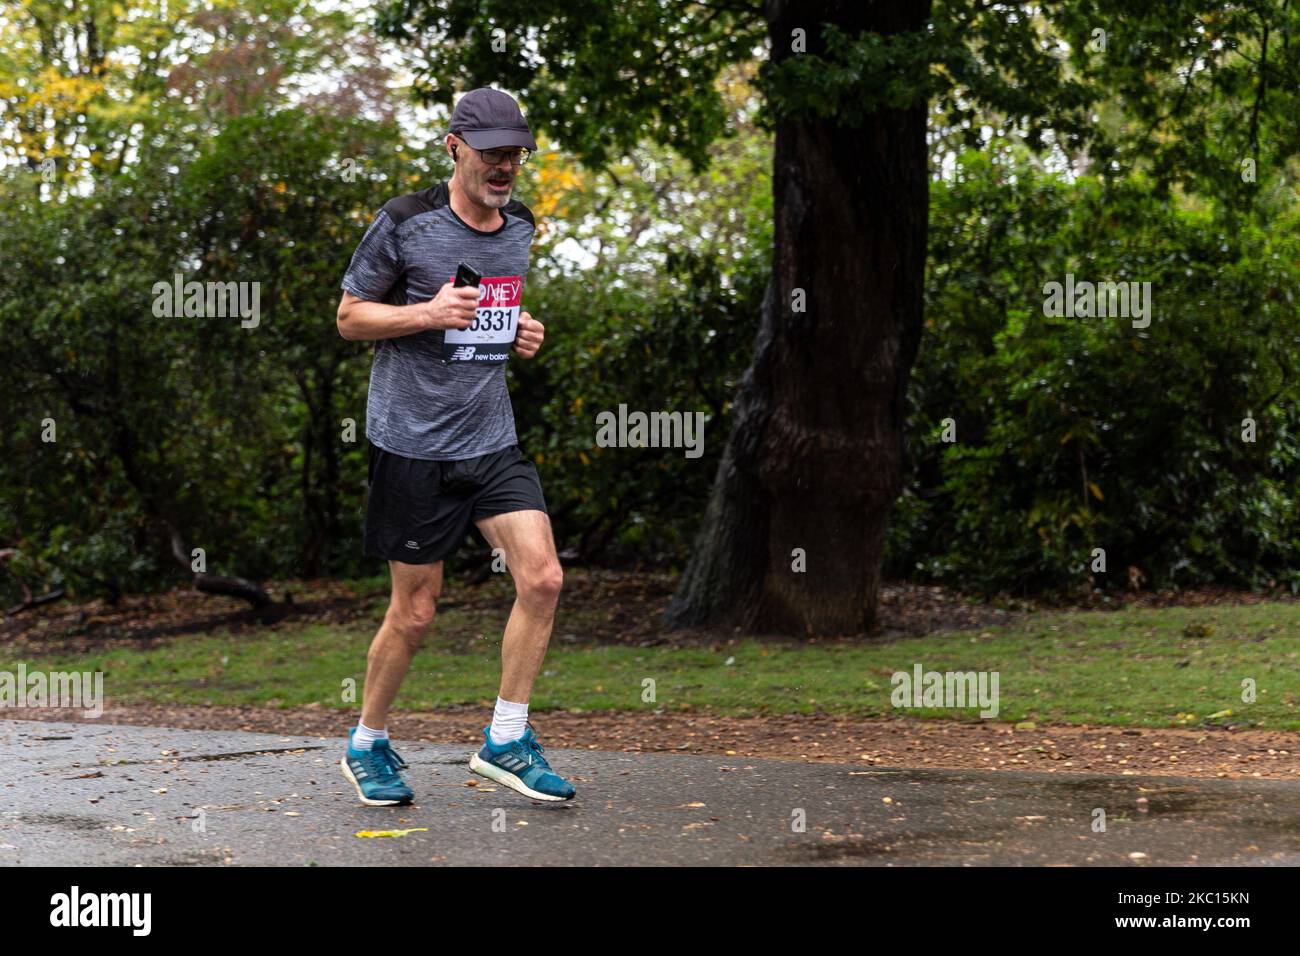 Tim Jackson a participant of Virgin Money Virtual London Marathon is seen running in cold rainy weather in Dulwich Park in South London, England on October 4, 2020. Due to Covid-19 pandemic, the London Marathon for the public was virtual. Participants run in locations of the choice, having a mobile application as a monitoring system. Family and friends often took shorter distances to support the runner. (Photo by Dominika Zarzycka/NurPhoto) Stock Photo